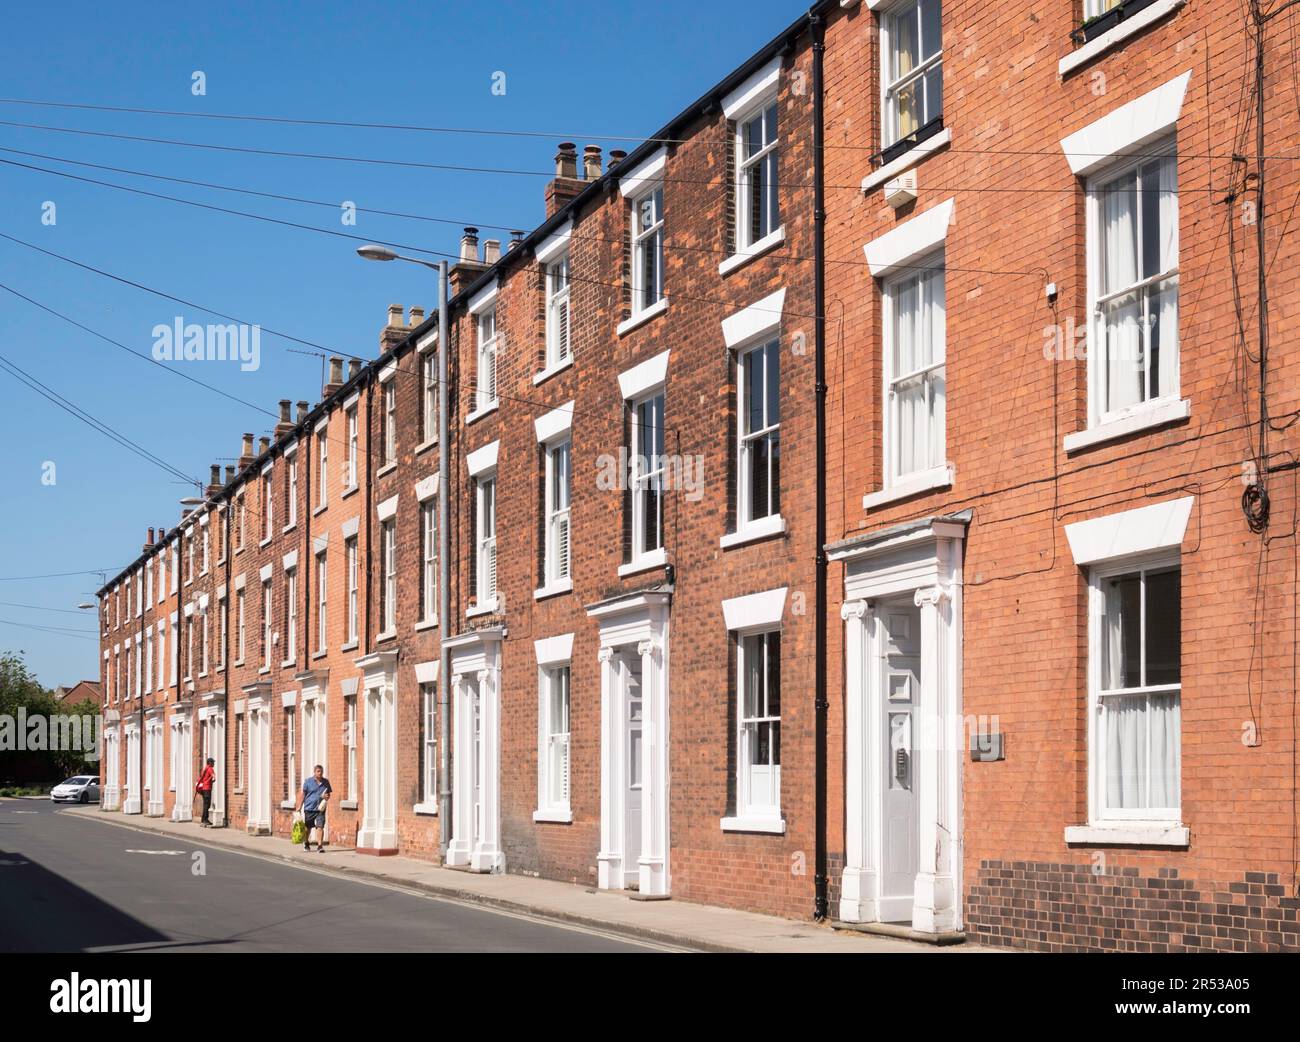 A terrace of 3 storey houses in Railway Street, Beverley, East Yorkshire, England, UK Stock Photo